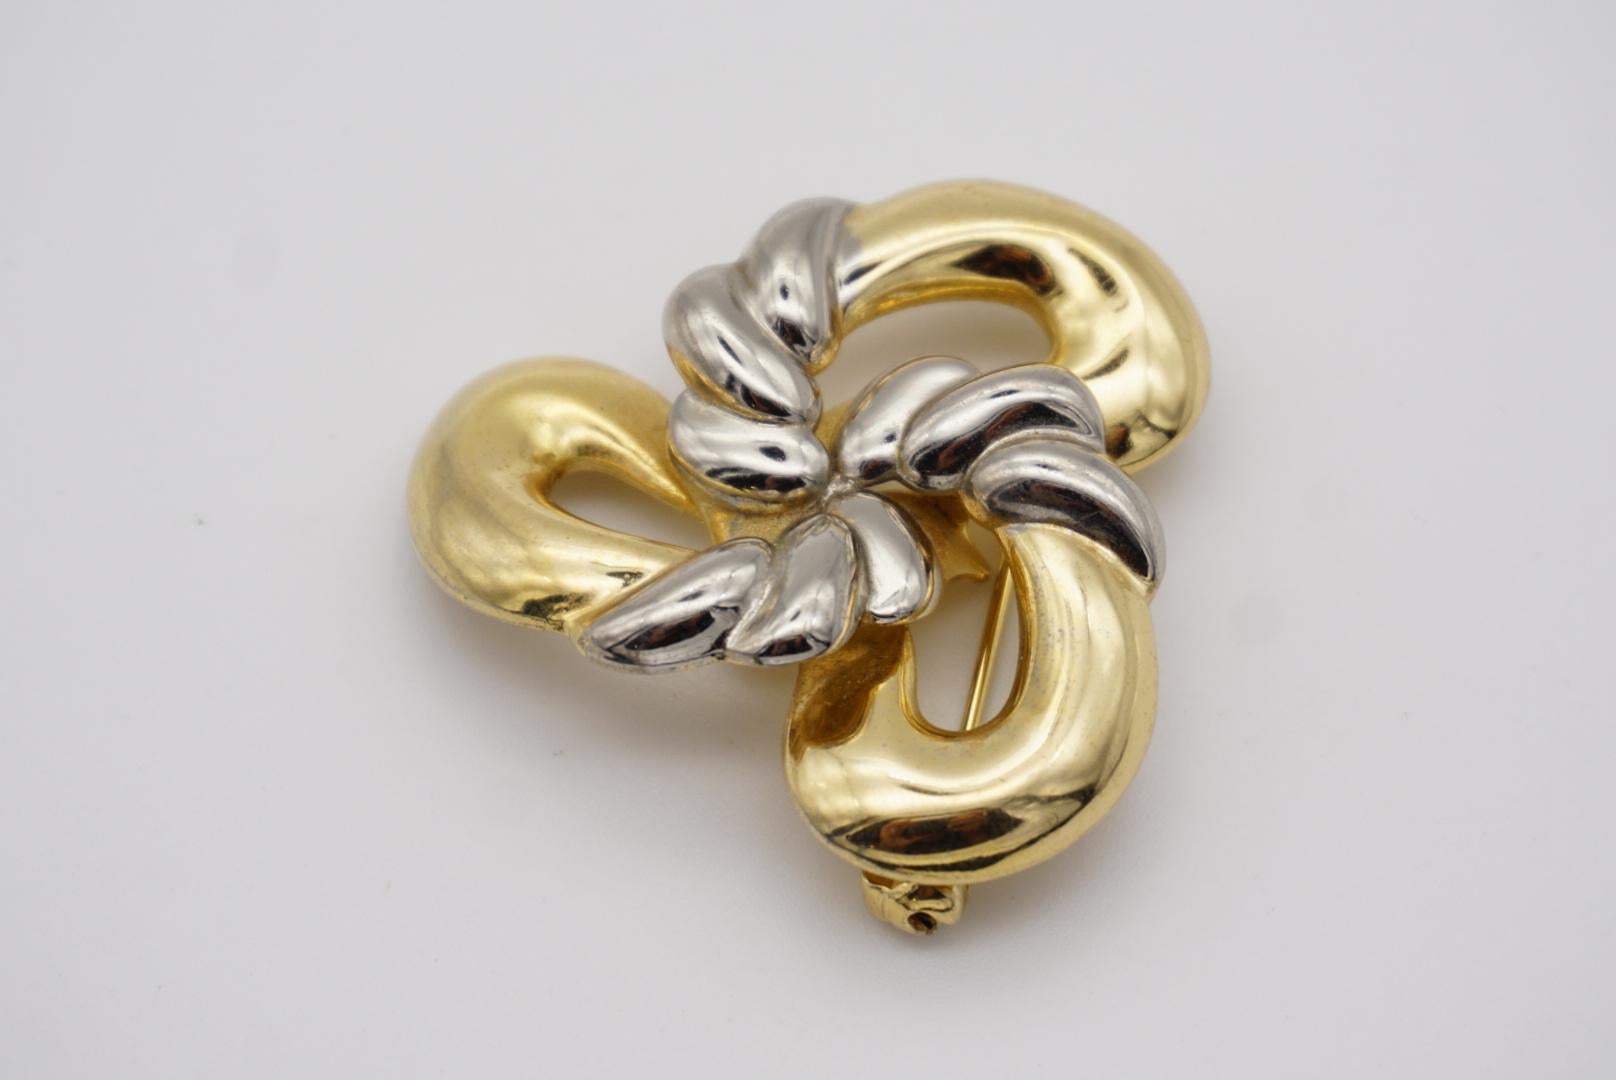 Christian Dior GROSSE 1969 Vintage Trio Knot Bows Swirl Twist Gold Silver Brooch For Sale 2